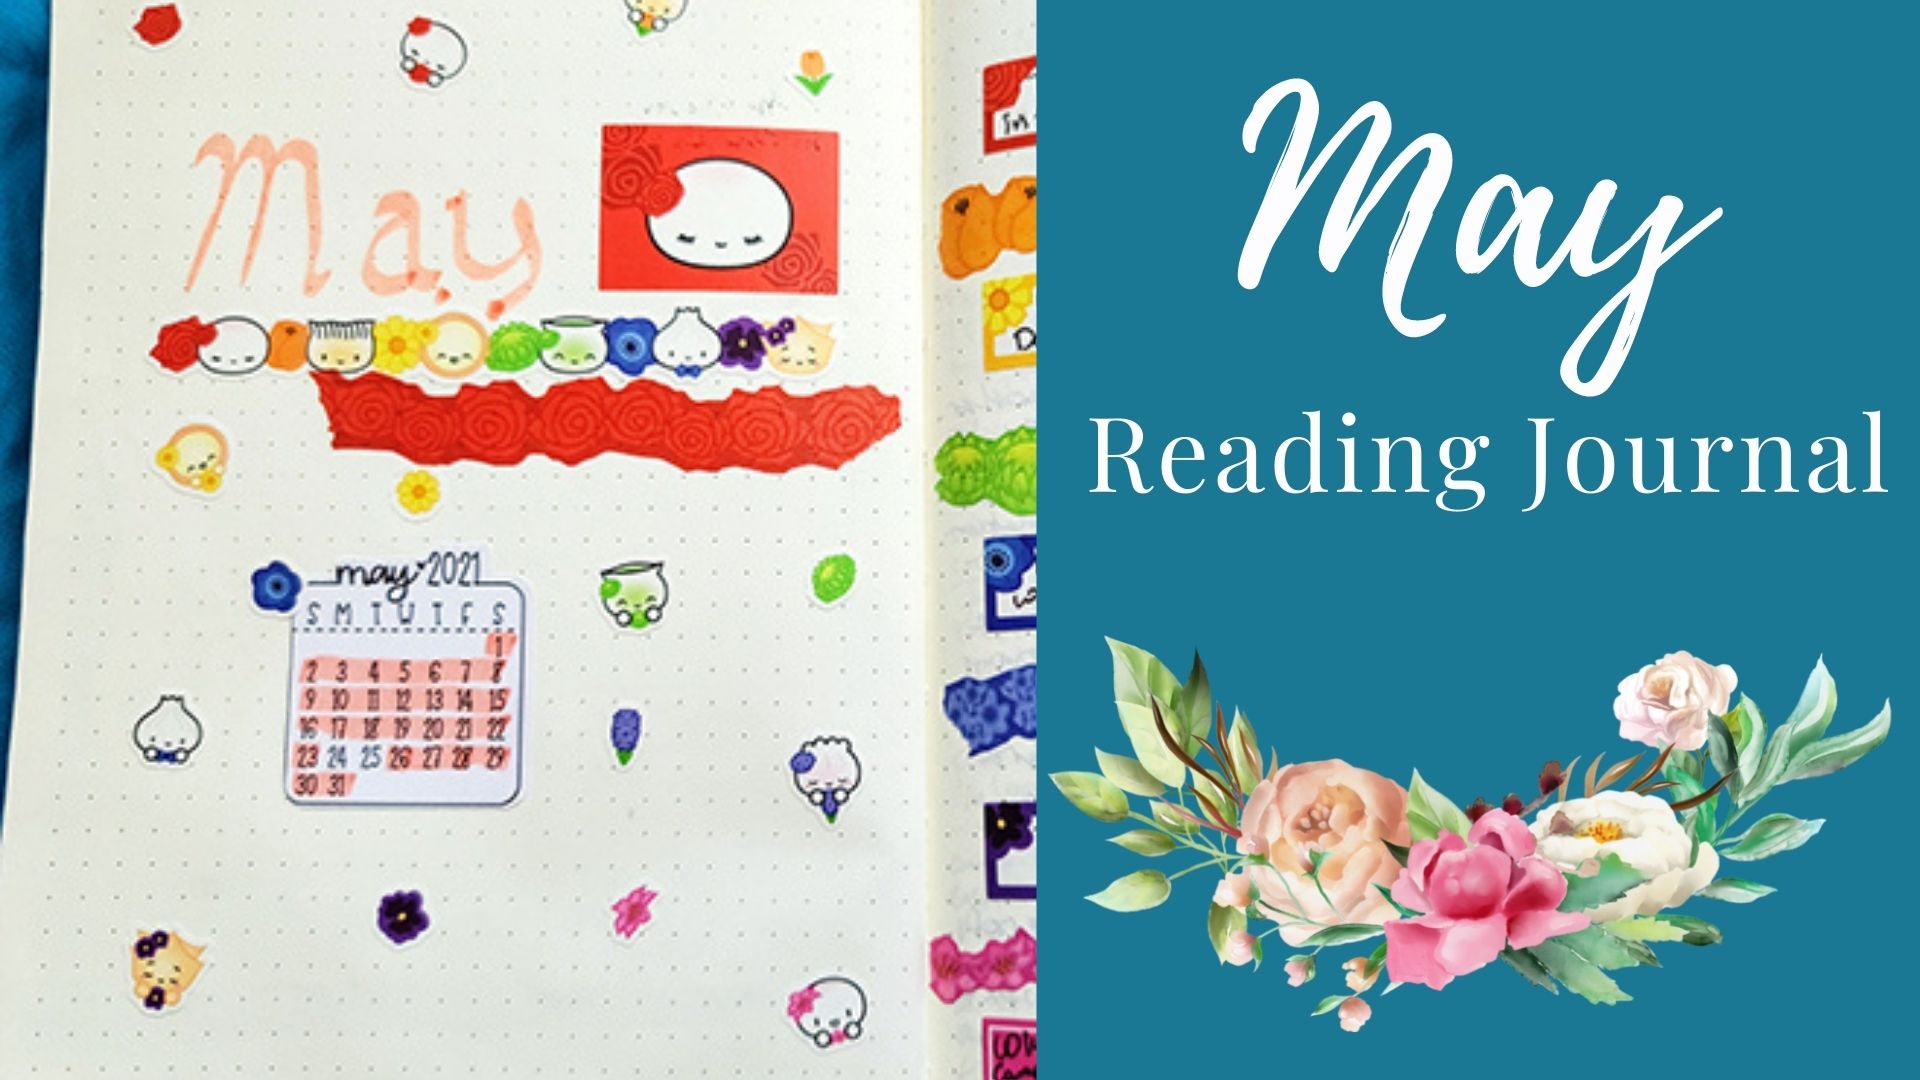 You are currently viewing May Reading Journal: Flower Theme